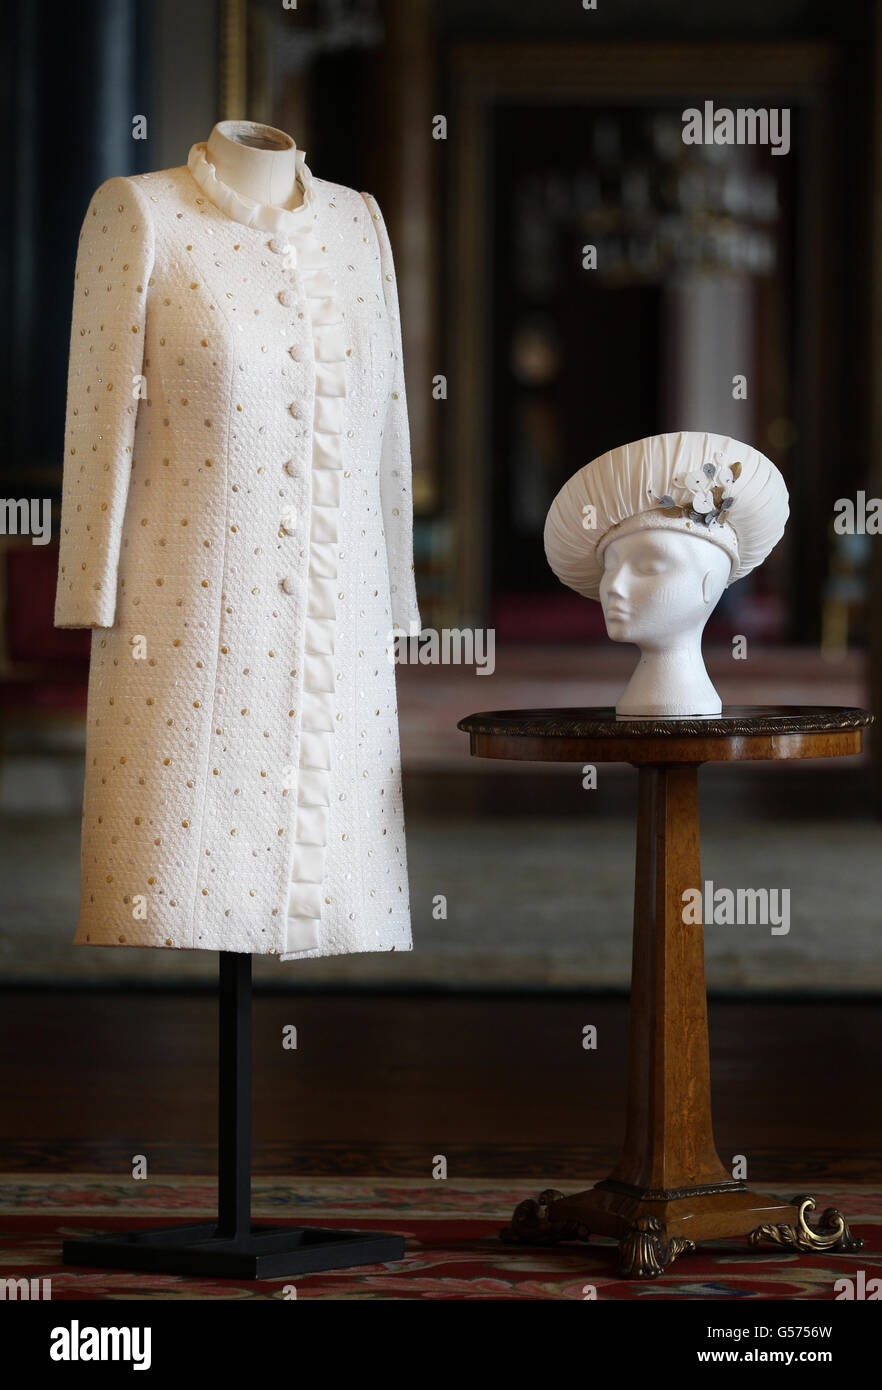 Previously unreleased photo of the ivory dress and coat, in white Boucle fabric and threaded throughout with silk ribbon, designed by Miss Angela Kelly MVO, which Queen Elizabeth II has worn for the Thames Diamond Jubilee Pageant. Stock Photo